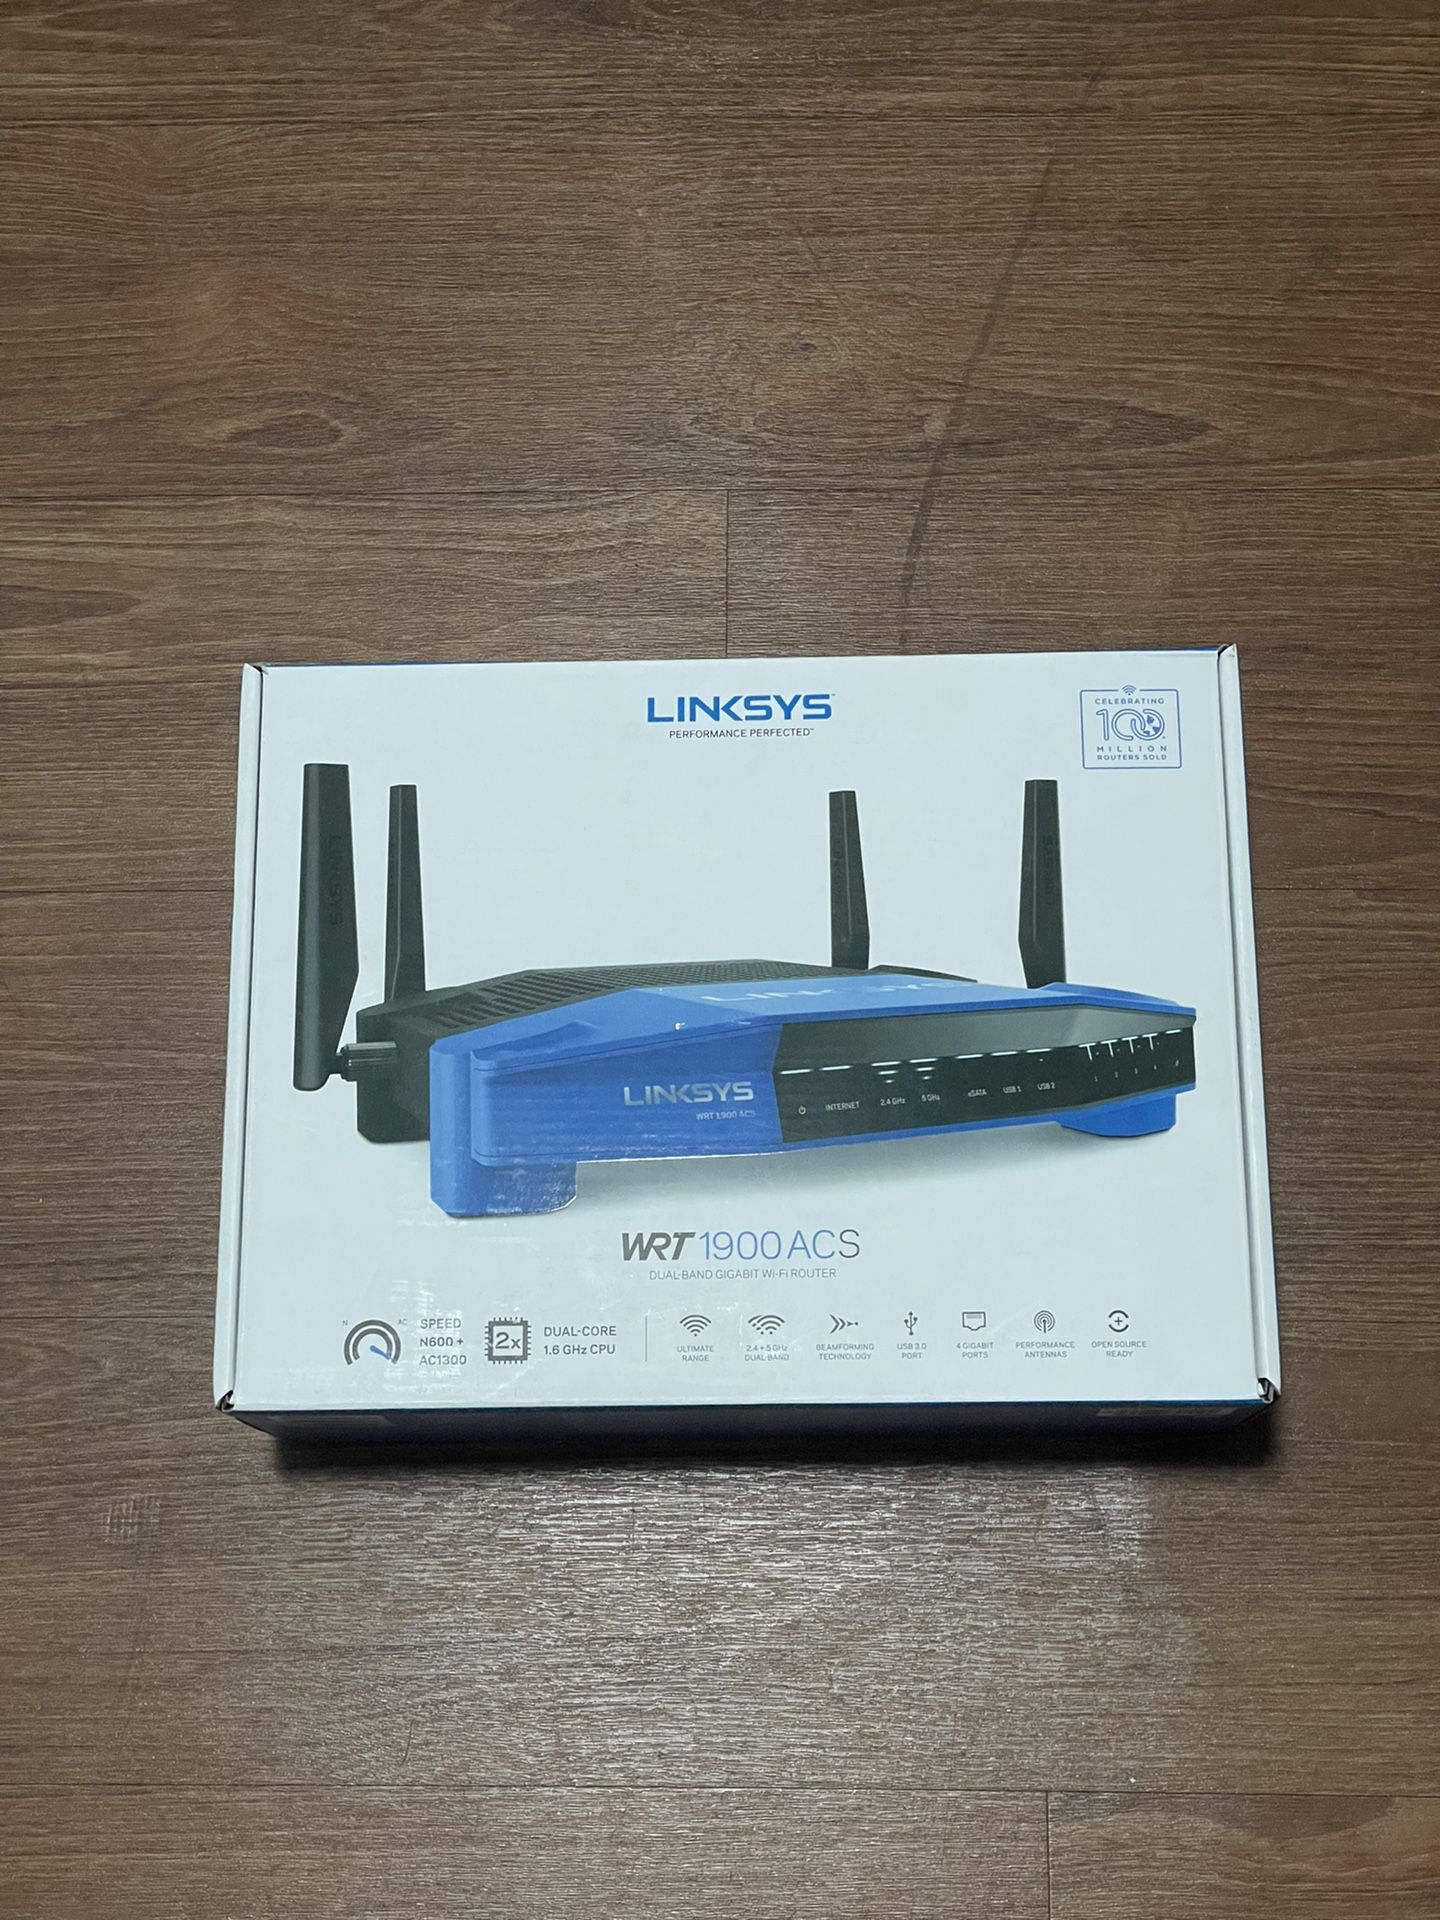 Linksys WRT 1900 ACS Dual Band Wireless Router 